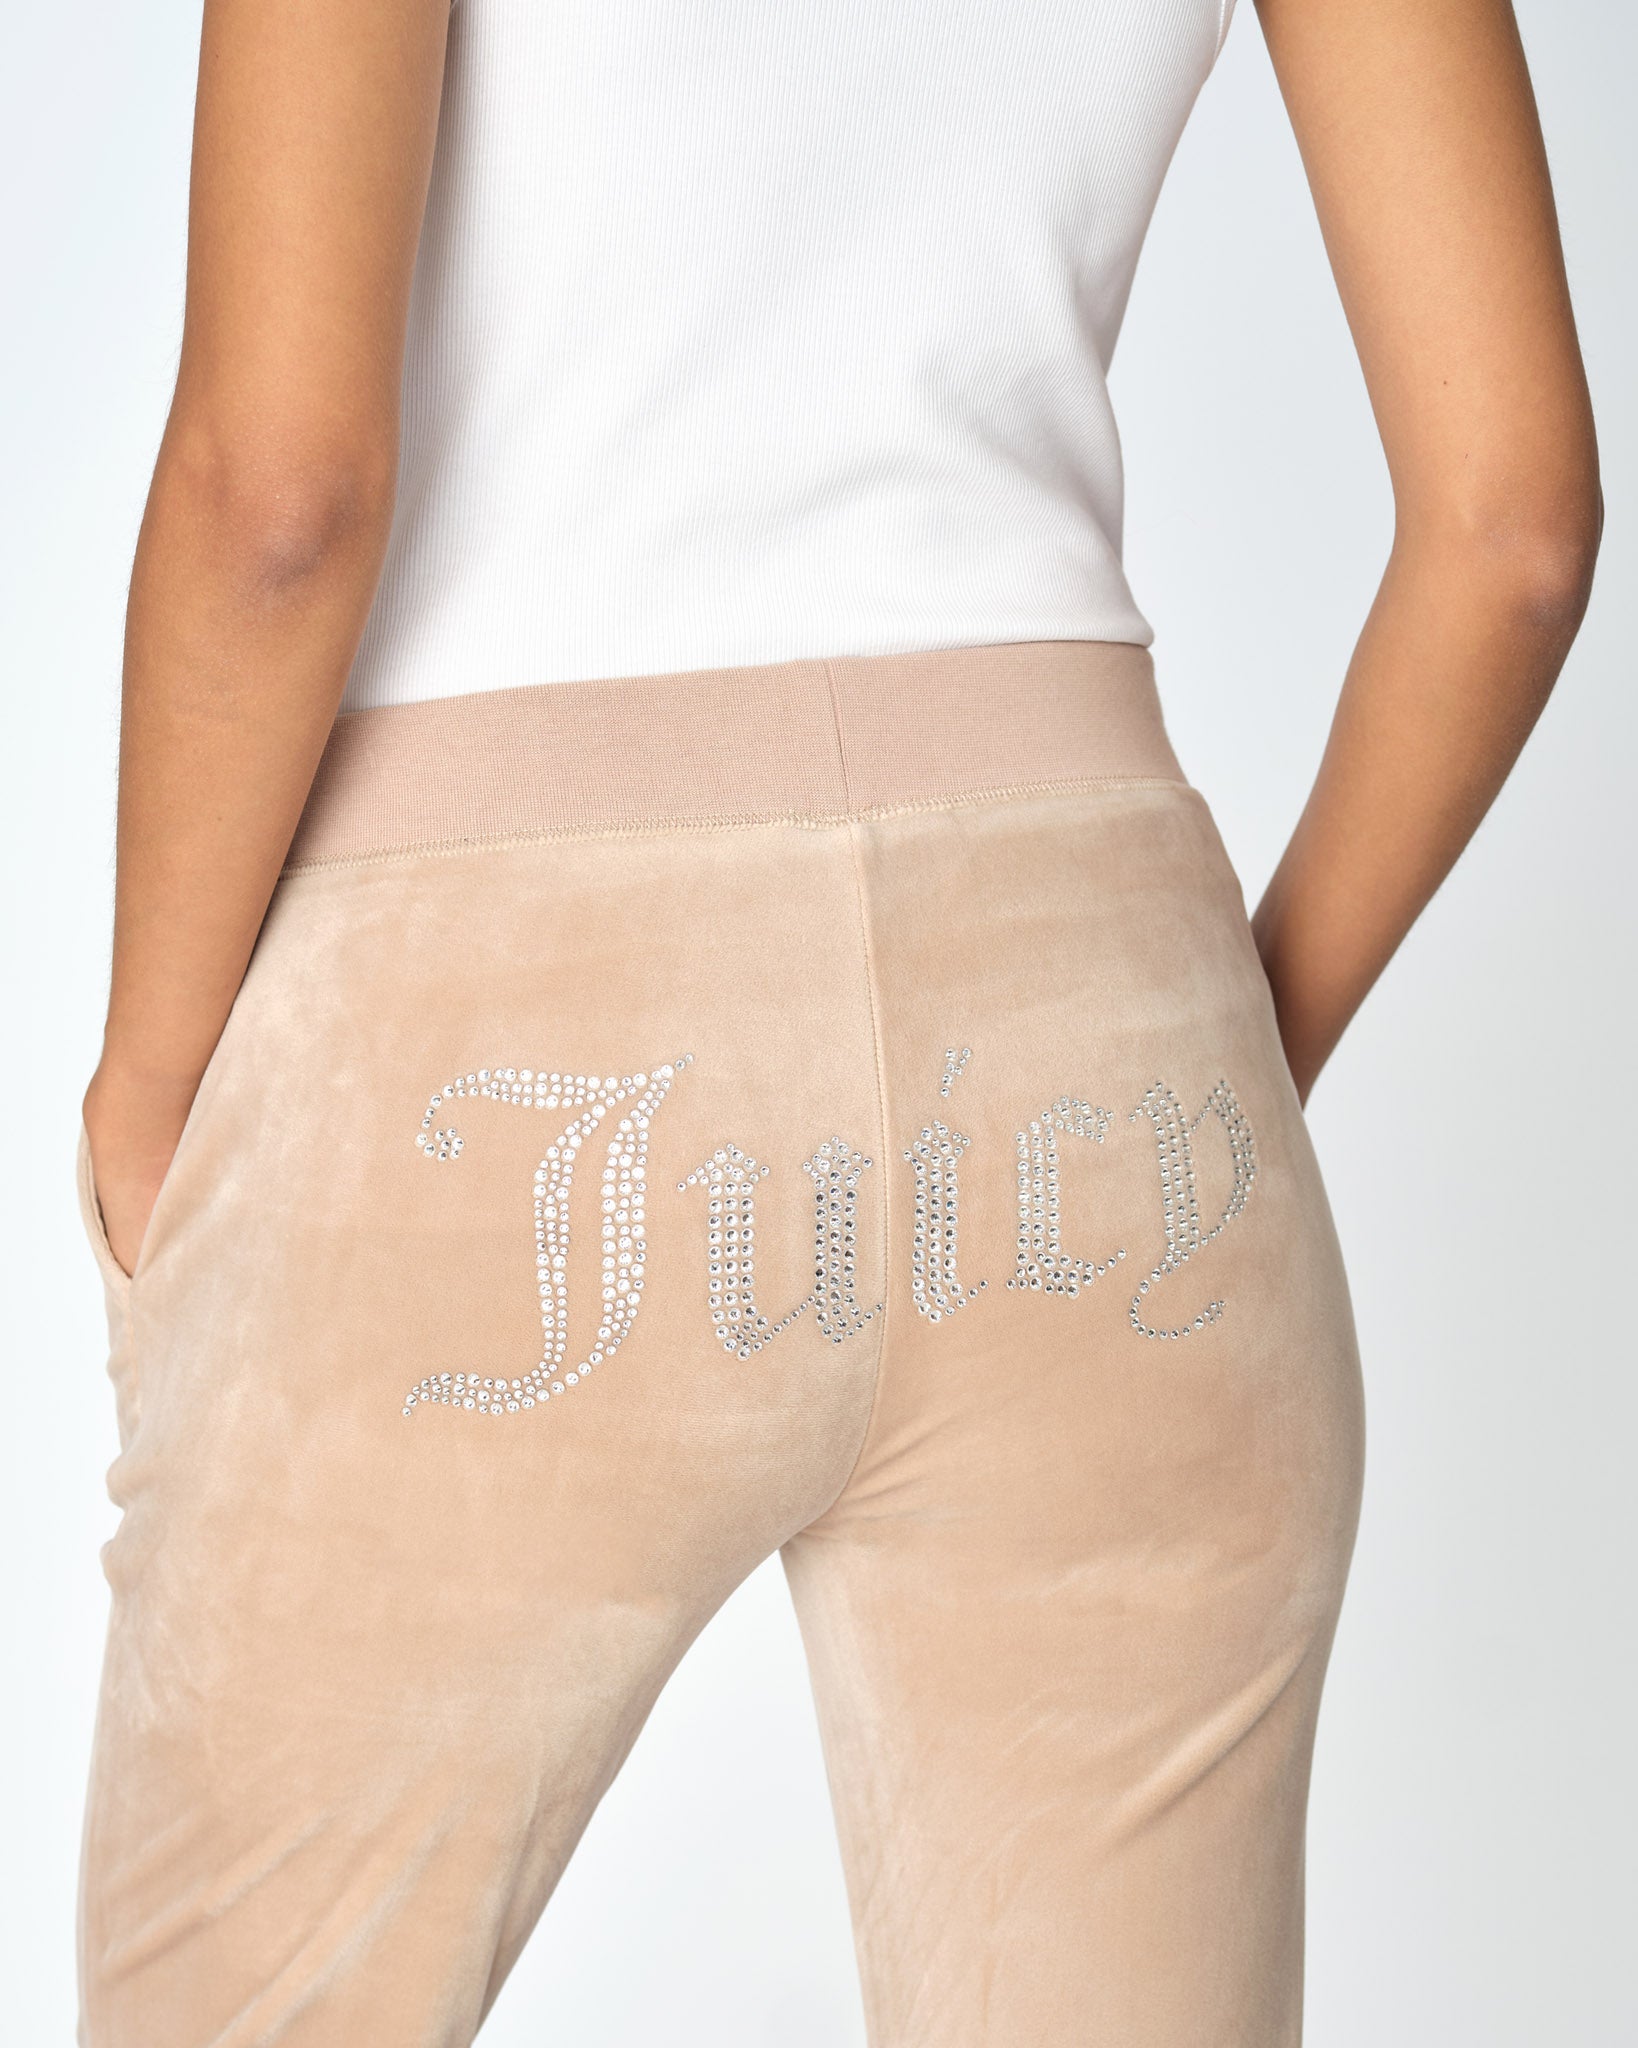 Classic Velour Diamante Del Ray Pant Warm Taupe - Juicy Couture Scandinavia